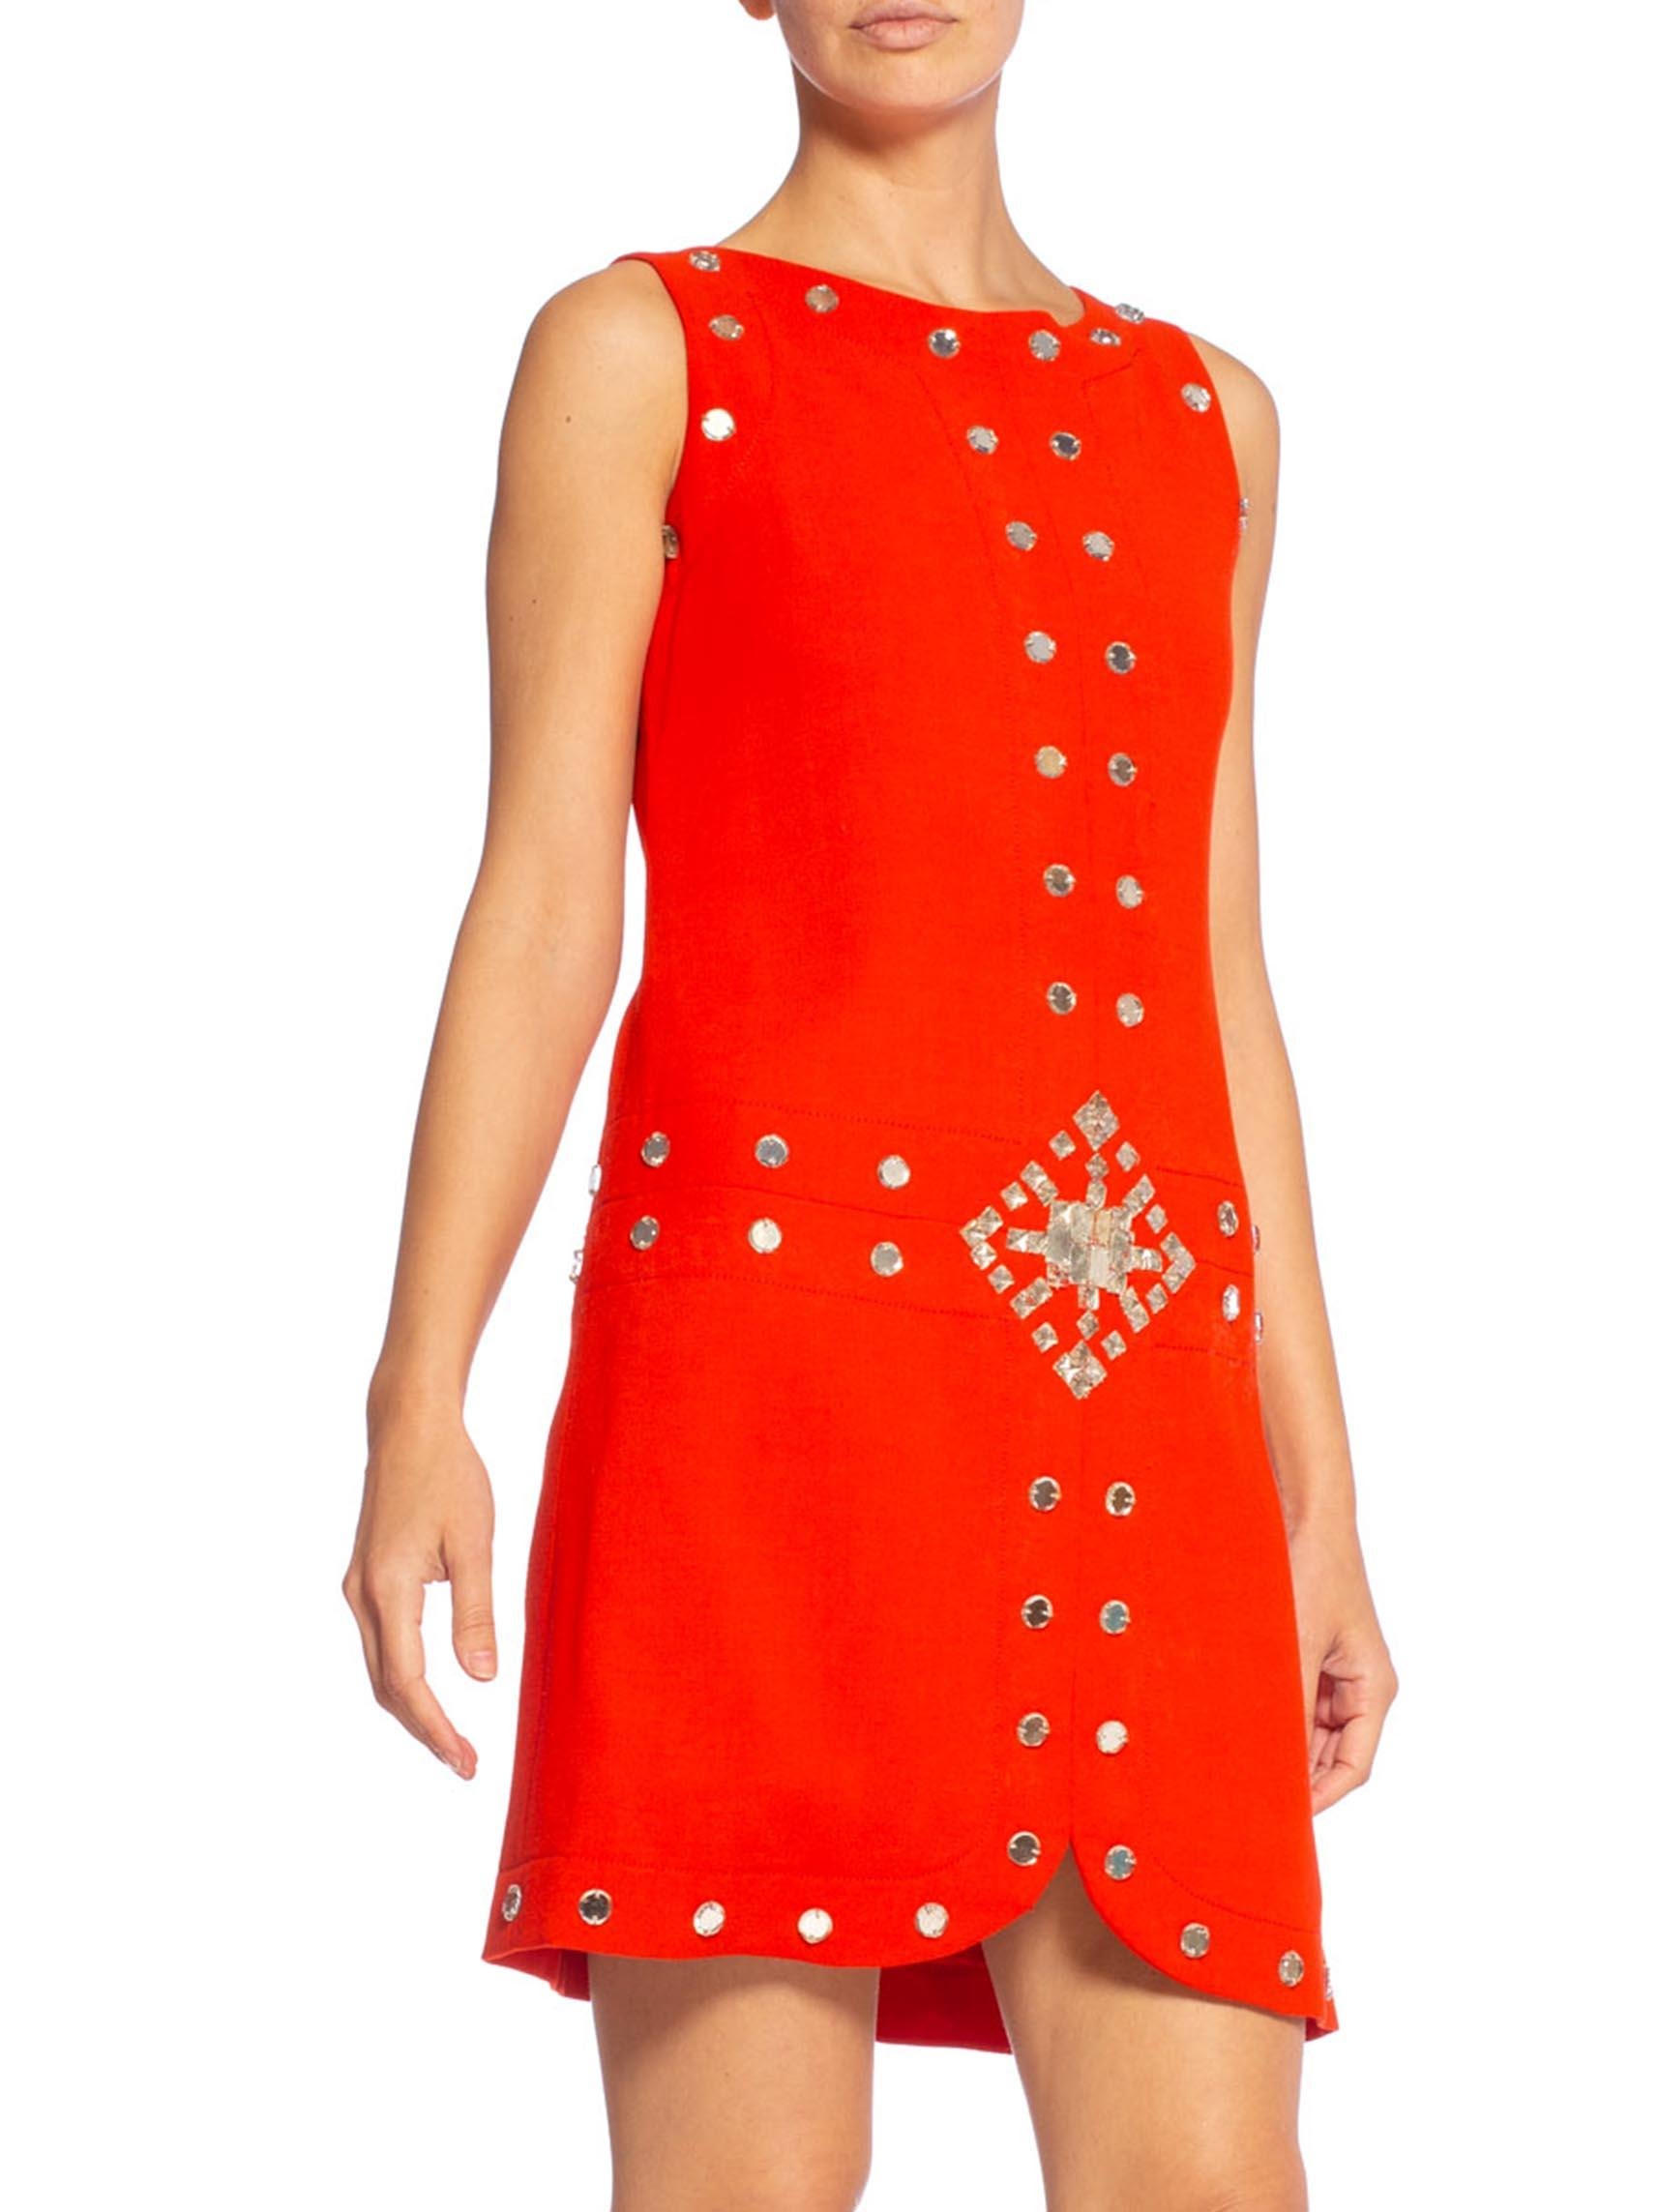 Haute Couture with no label, several small holes in the wool, fully lined in silk. 1960'S AZZARO Coral Red Haute Couture Wool Crepe Mod Cocktail Dress With Antique Mirror Gems 